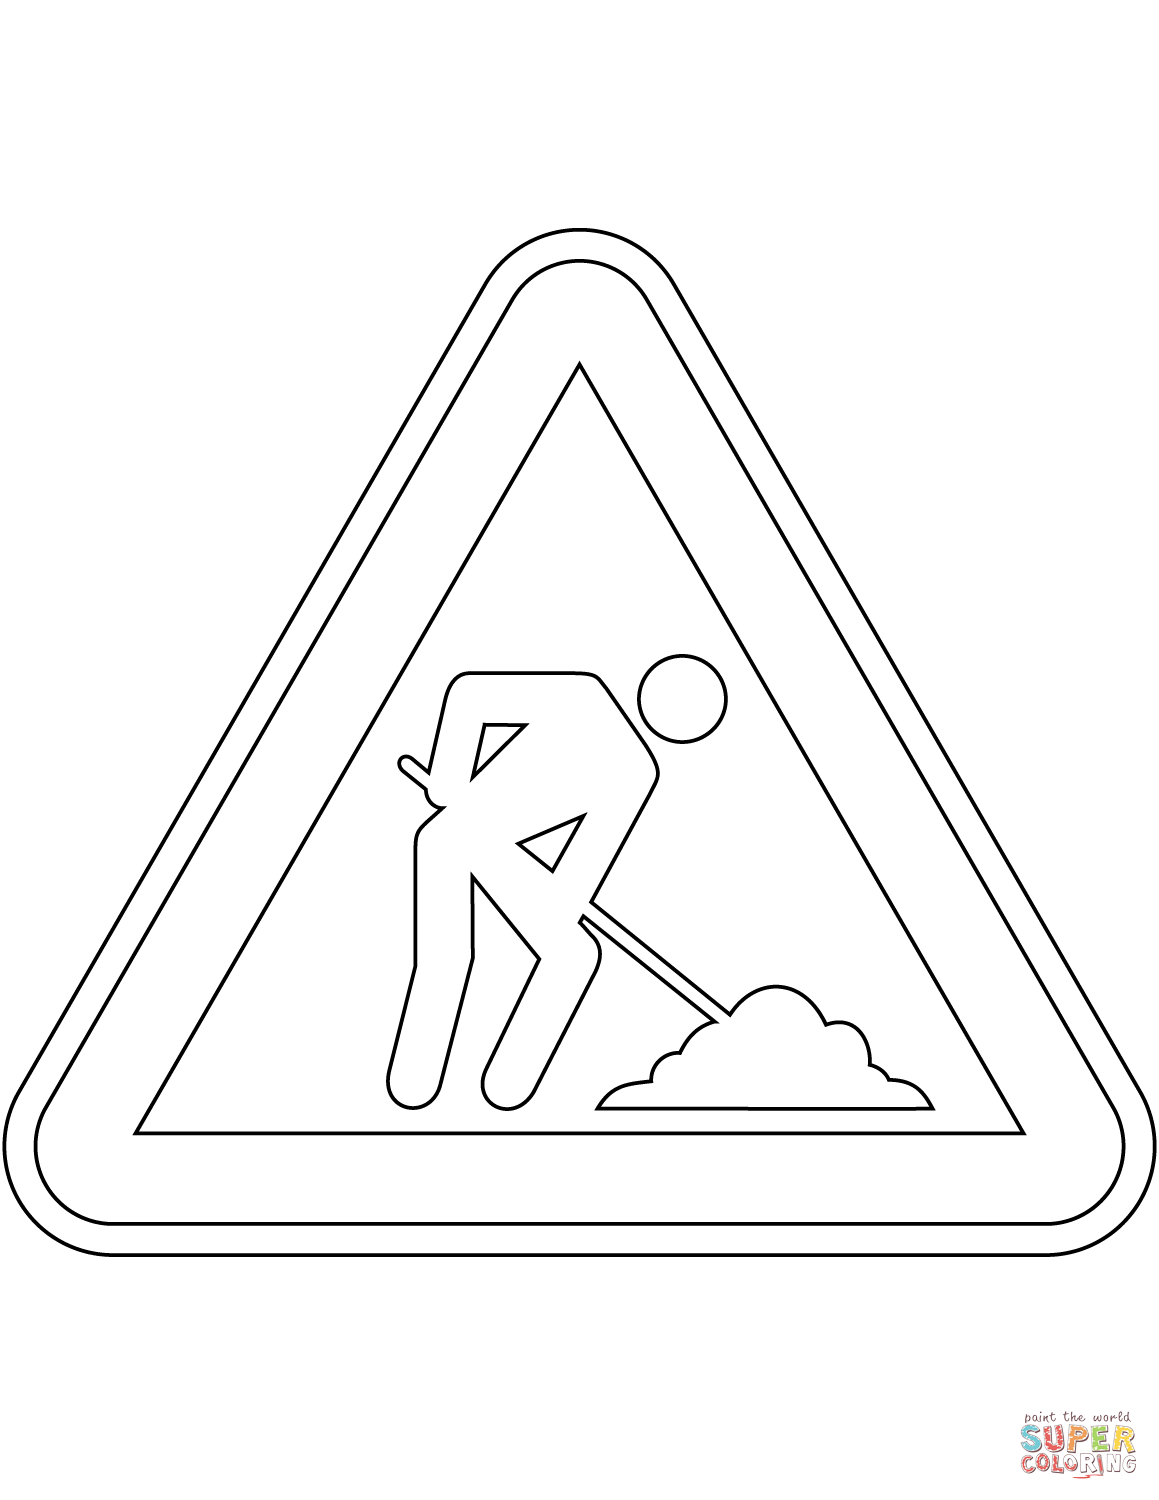 Roadworks ahead sign in portugal coloring page free printable coloring pages